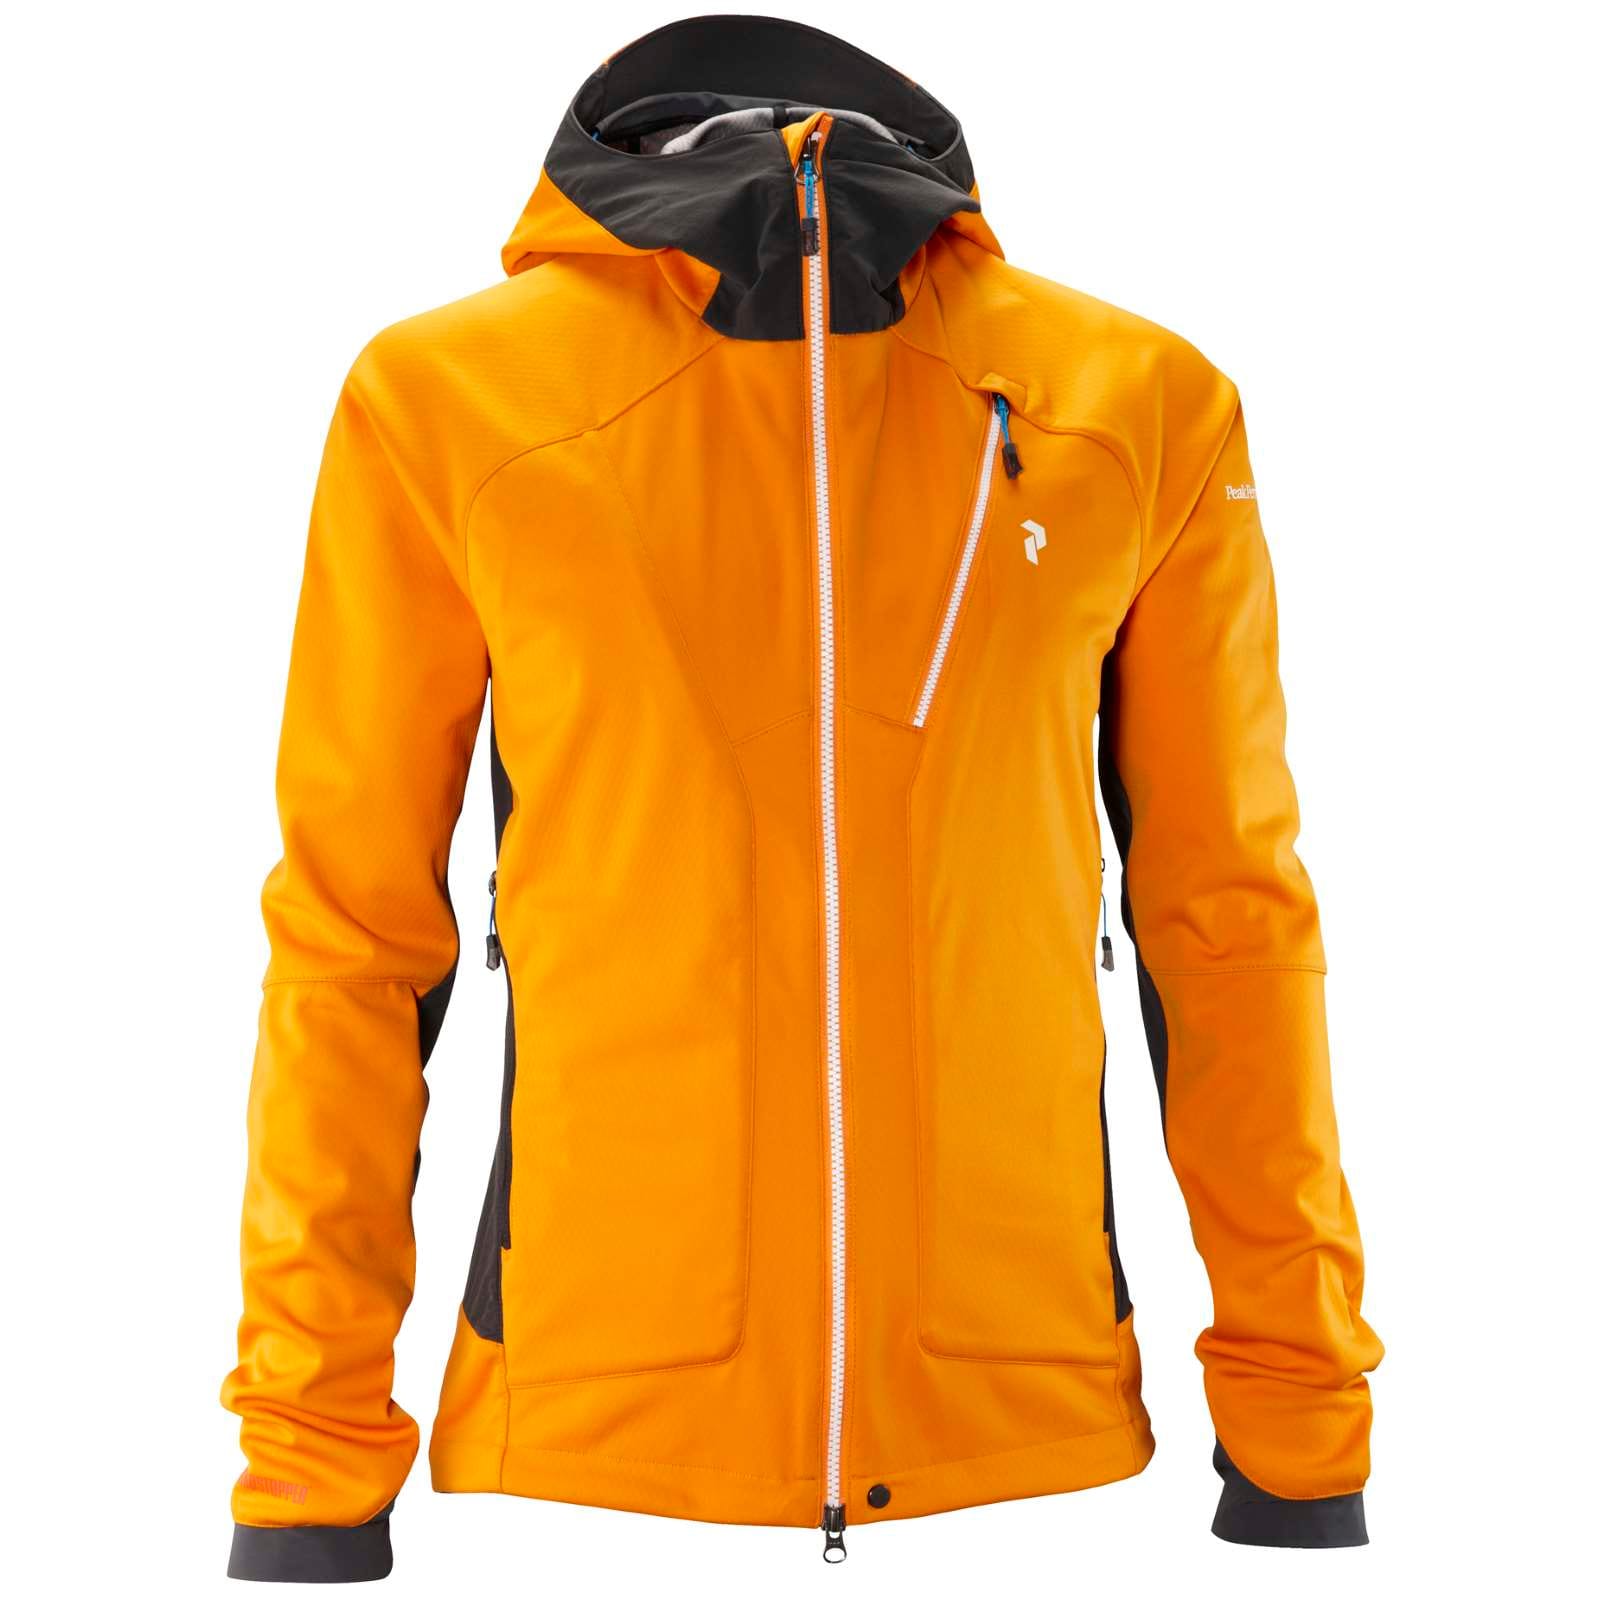 Buy Performance Rando Jacket from Outnorth